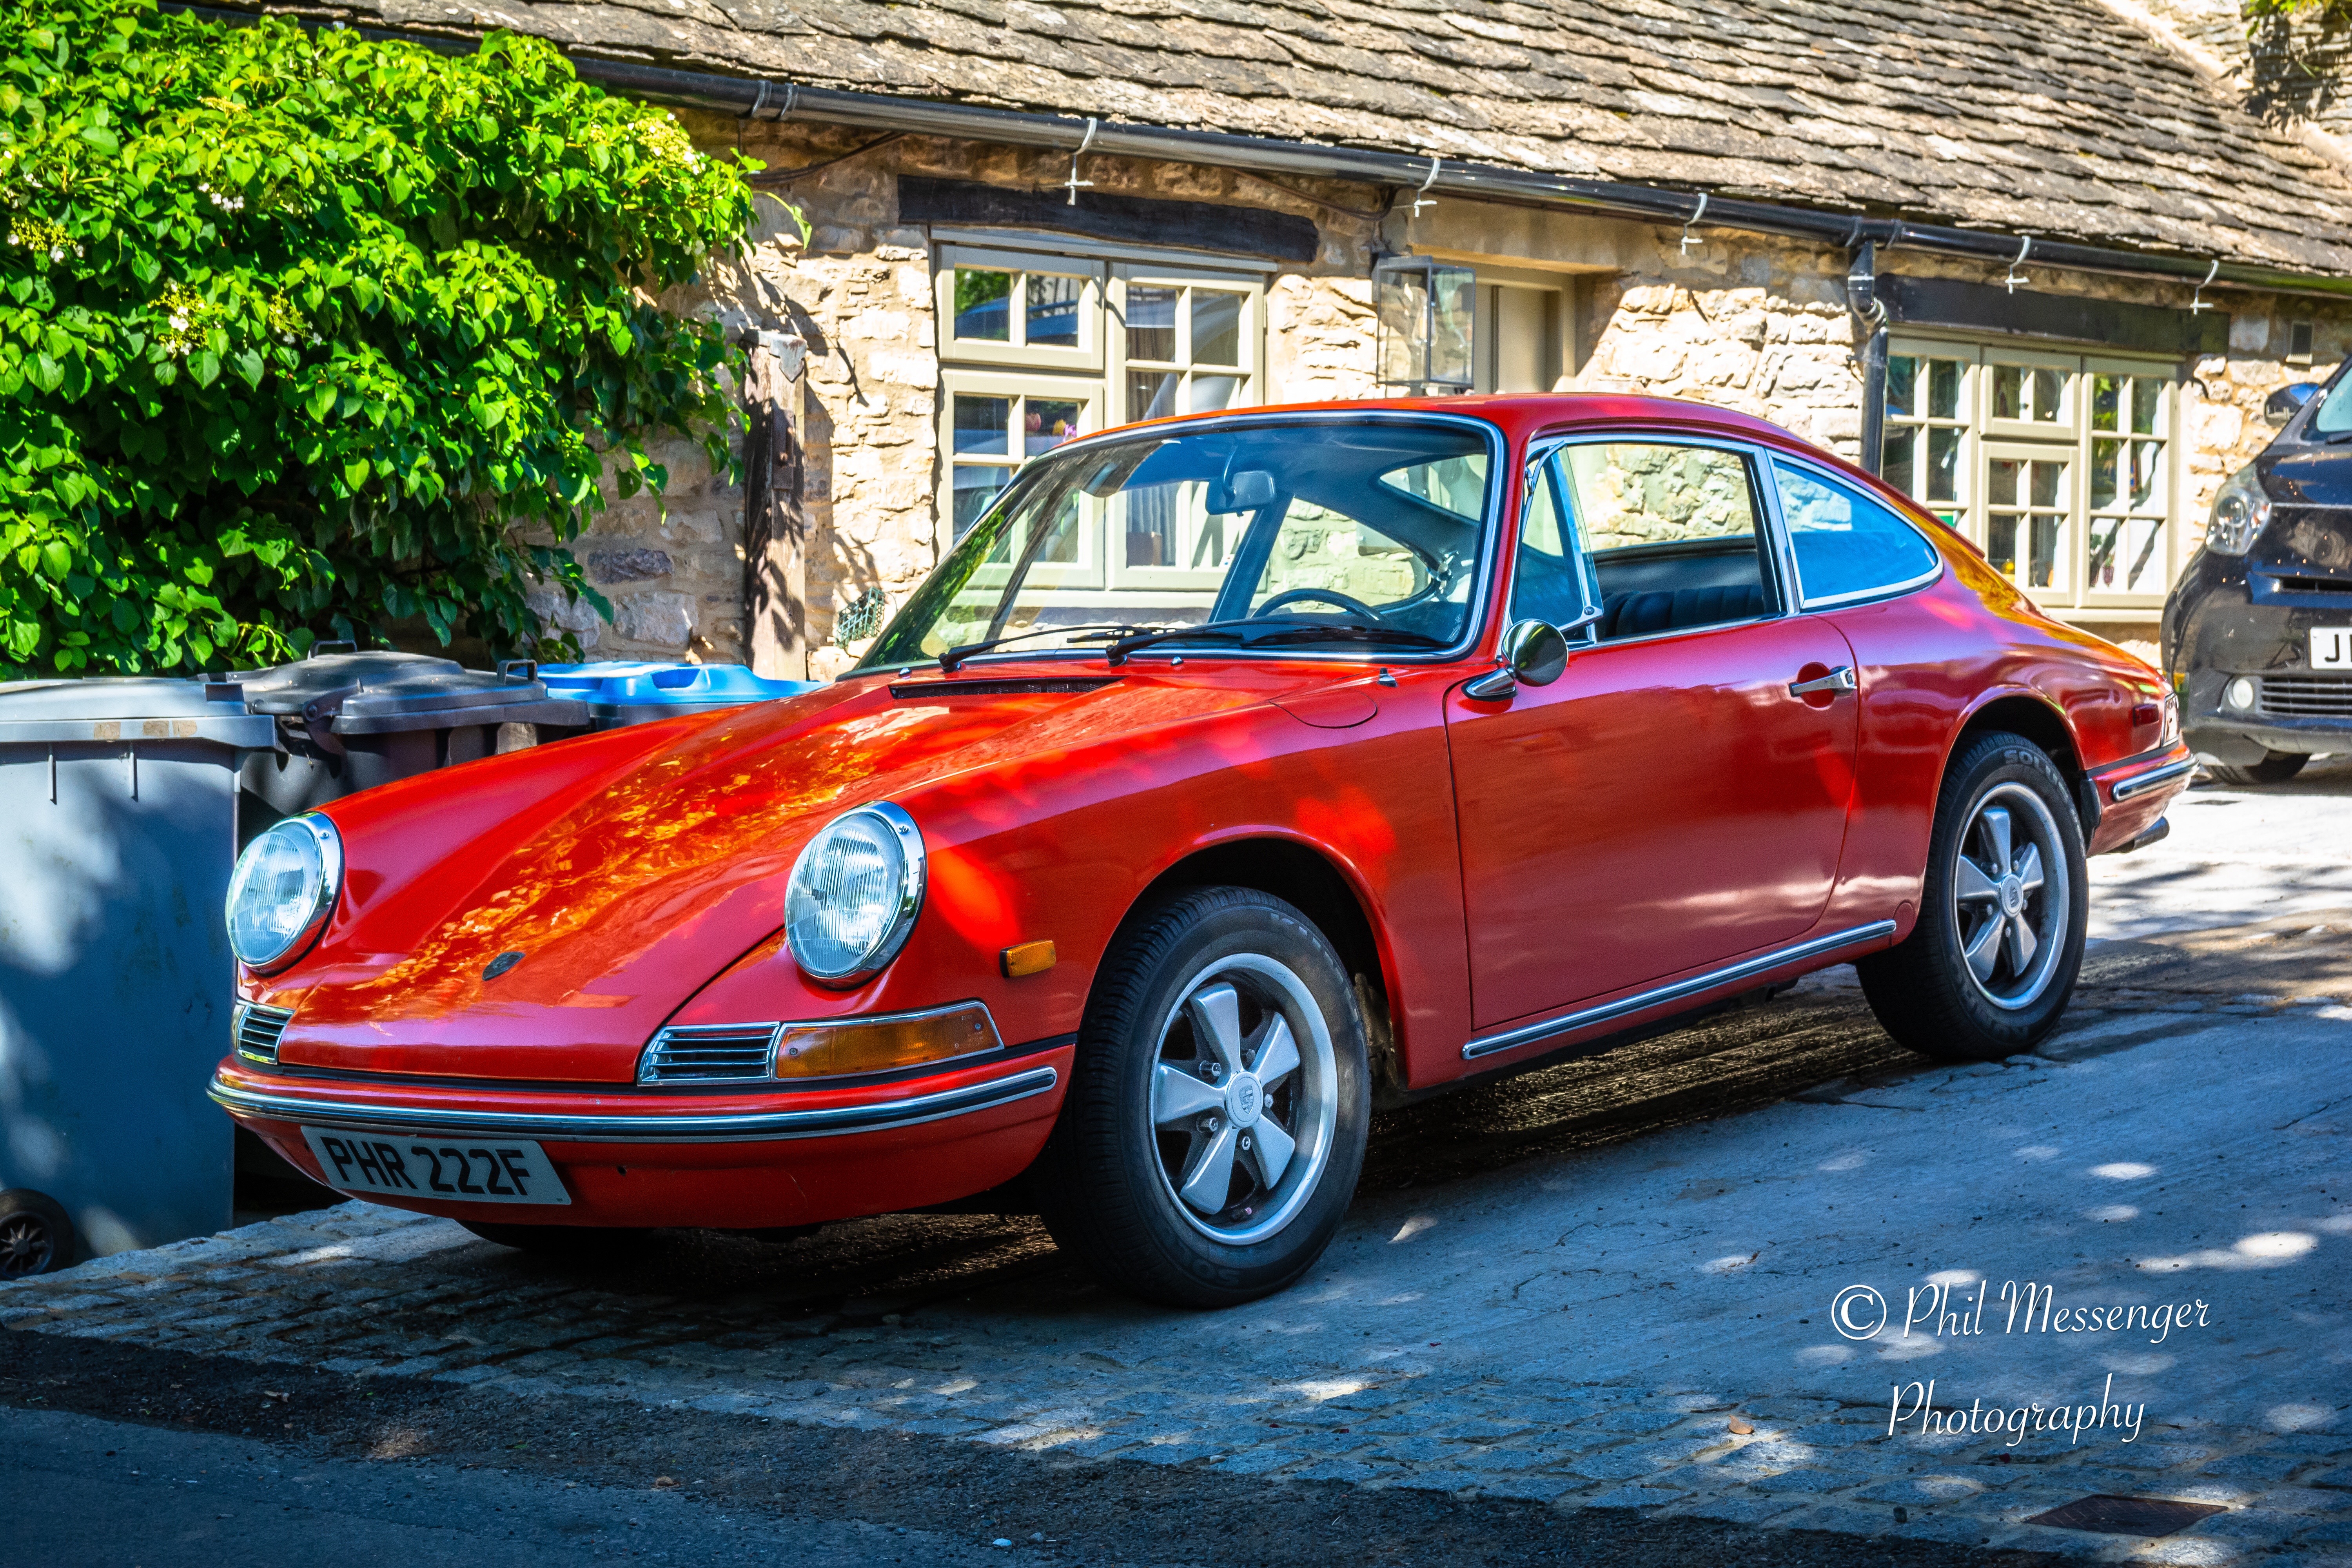 A beautiful 1968 Porsche 912 in the Cotswolds, England.